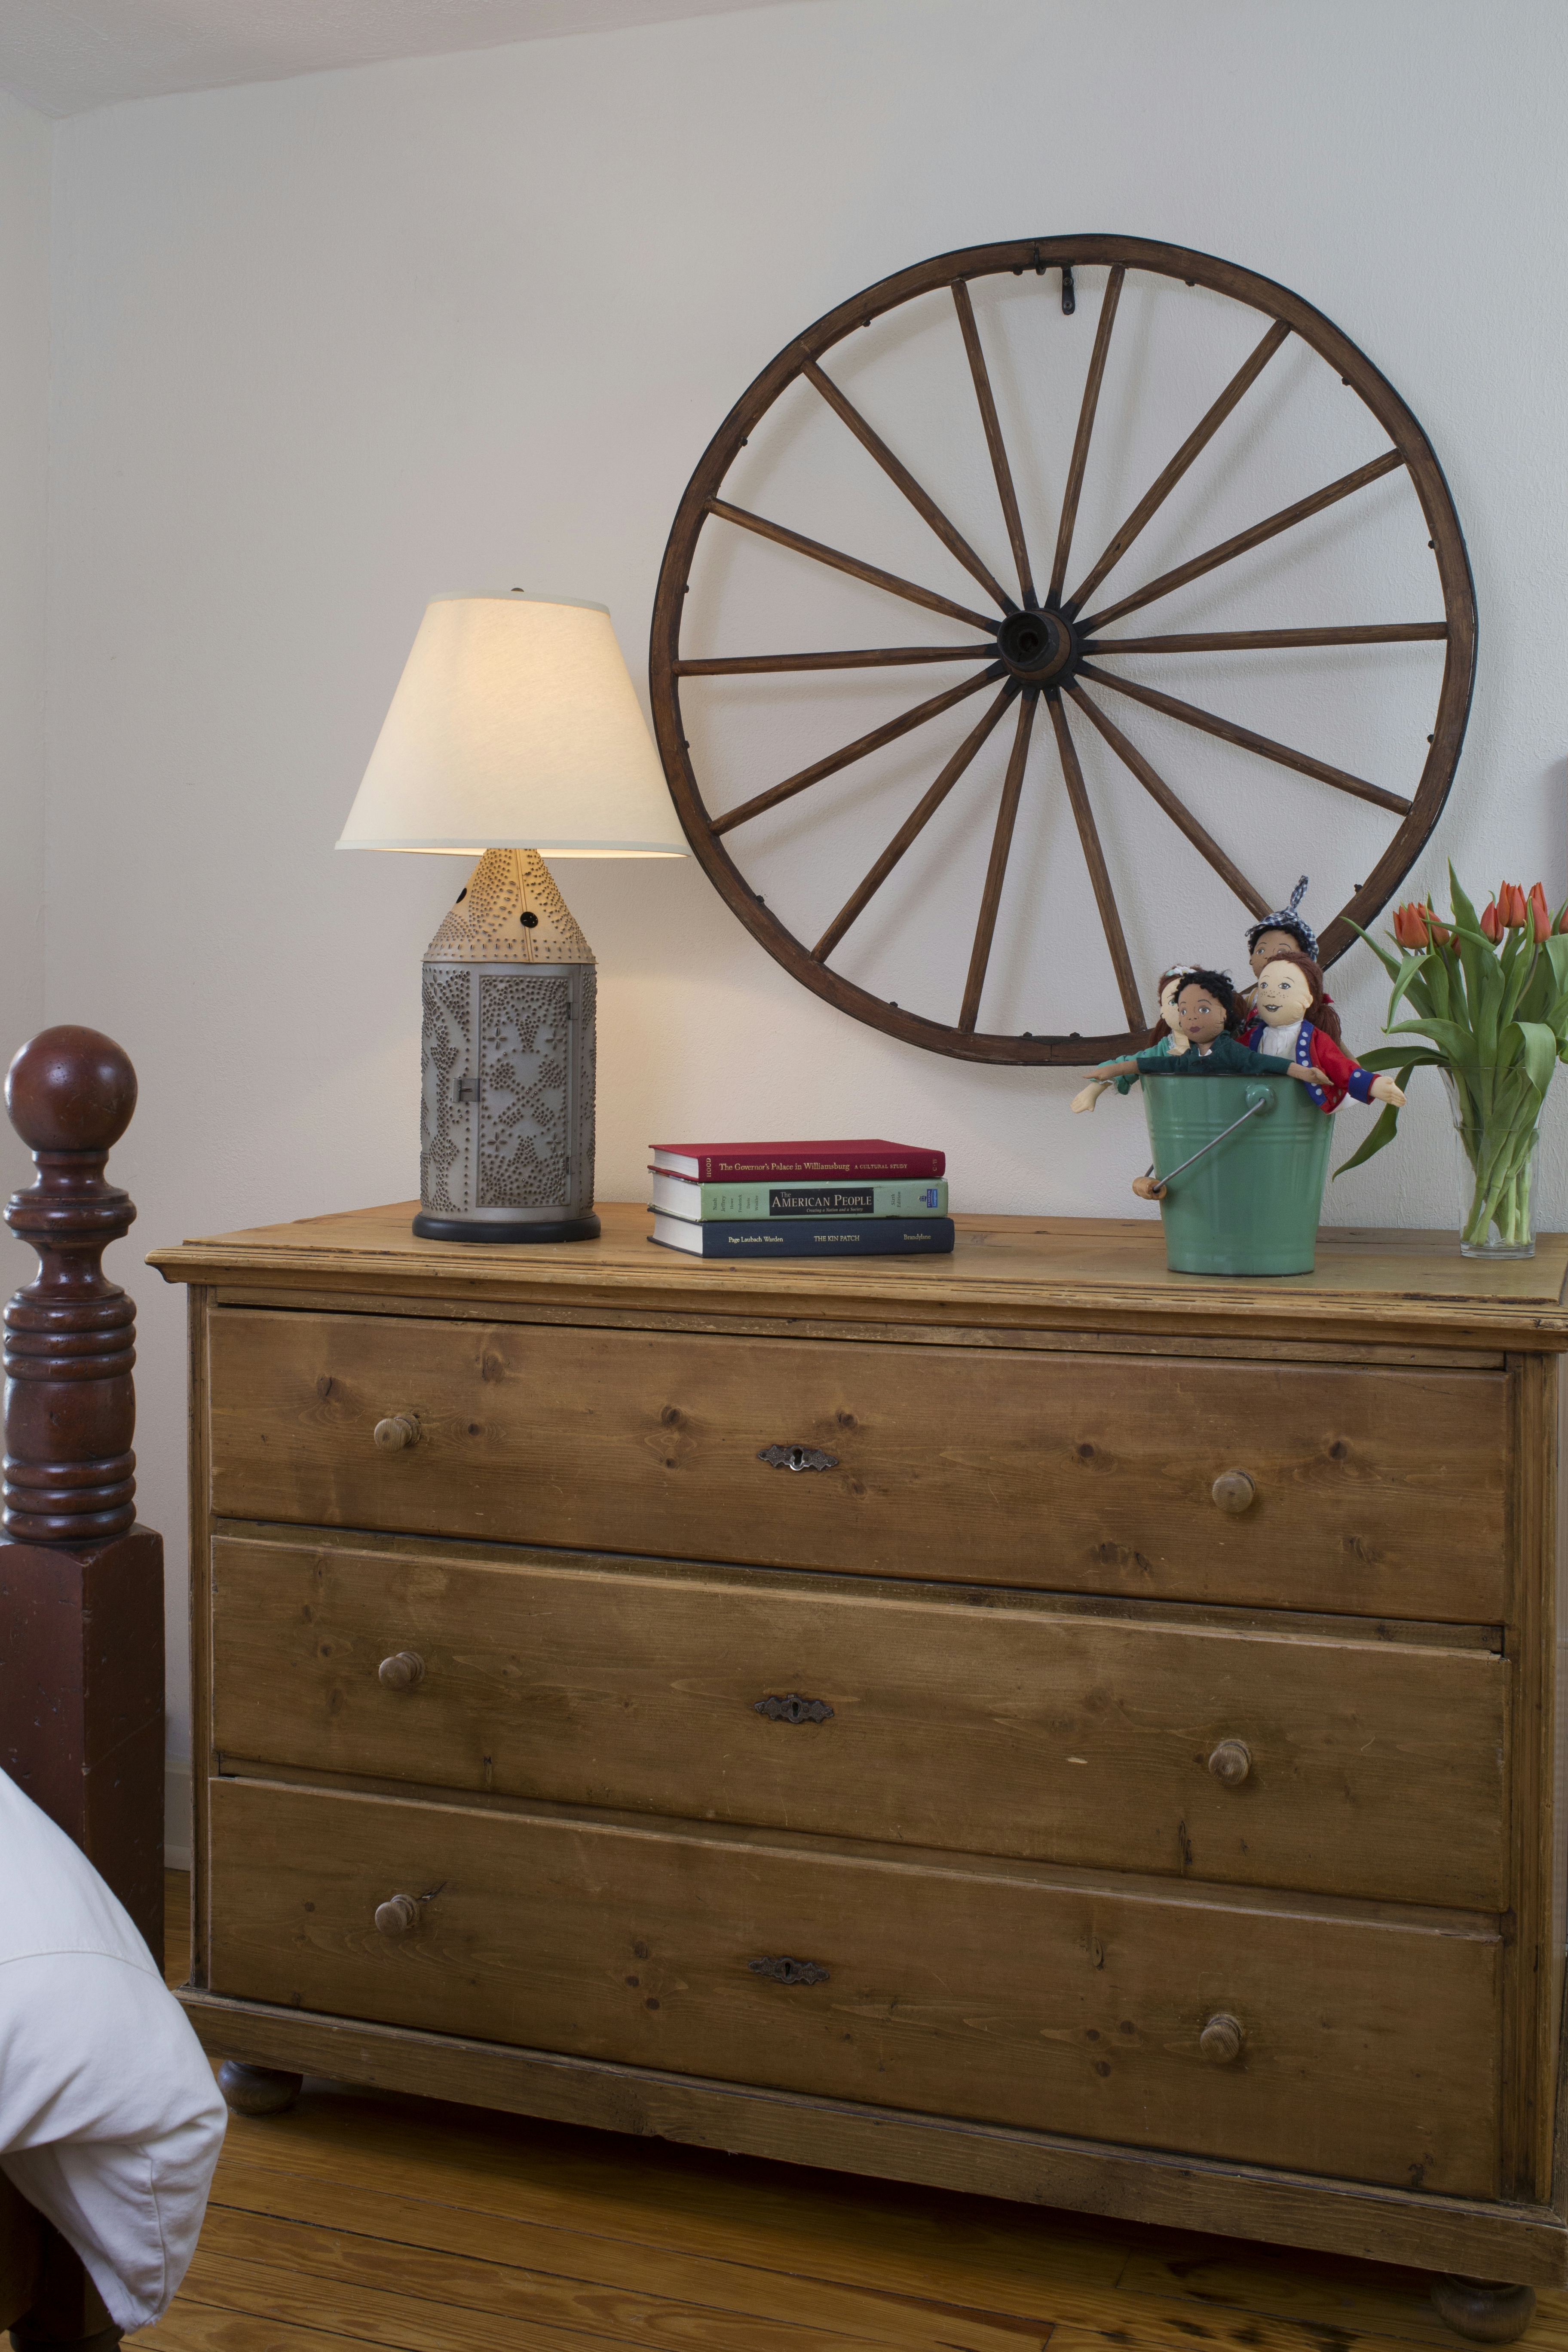 Wooden chest of drawers with table lamp, books, vase of tulips, wagon wheel hanging on wall above